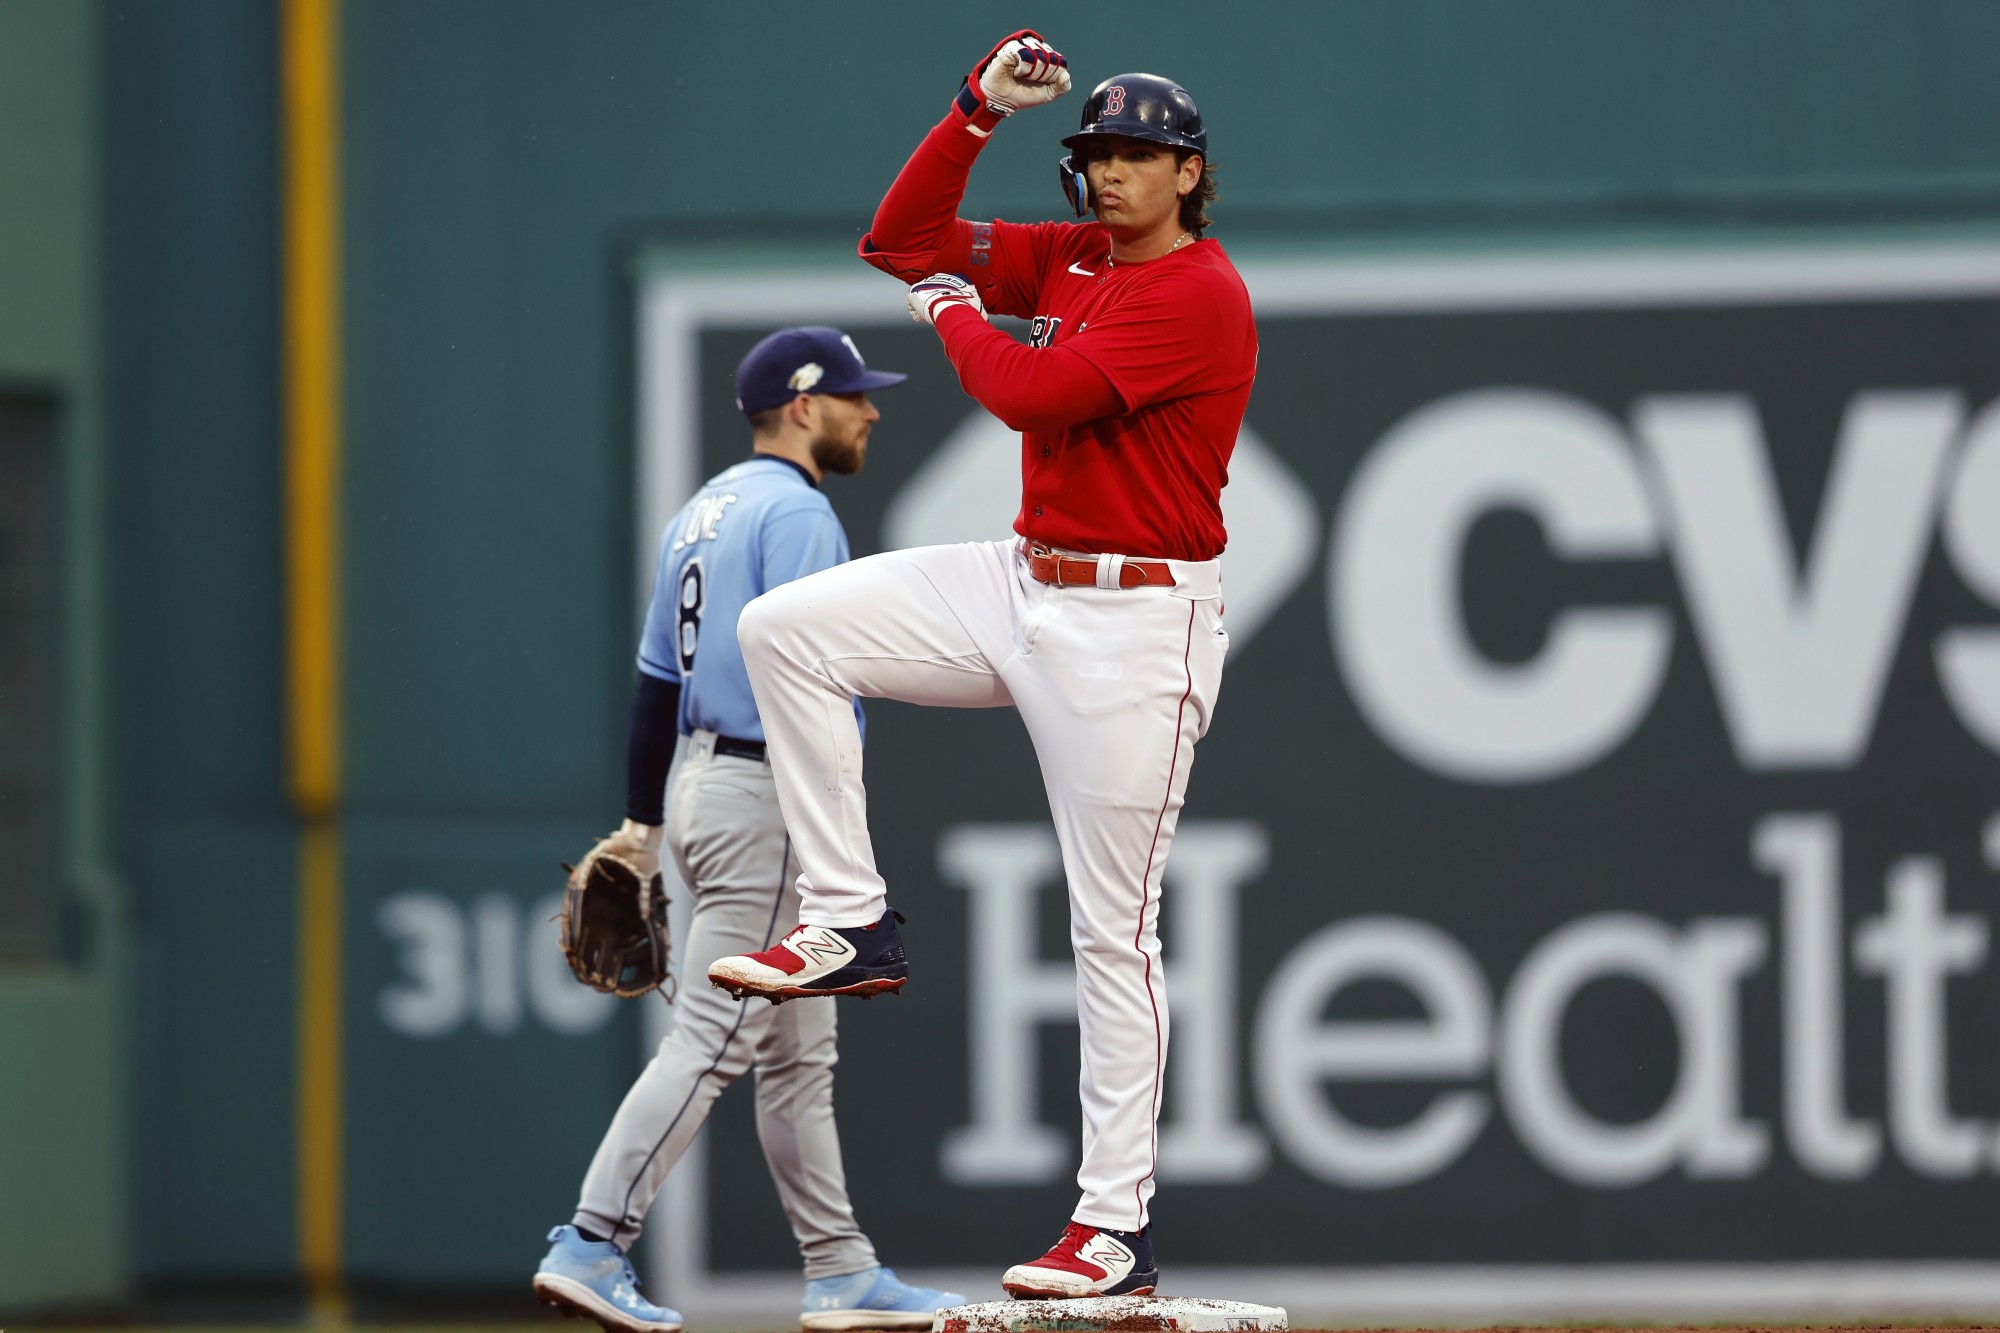 Boston Red Sox Top Prospects: Connor Wong leads the crop of